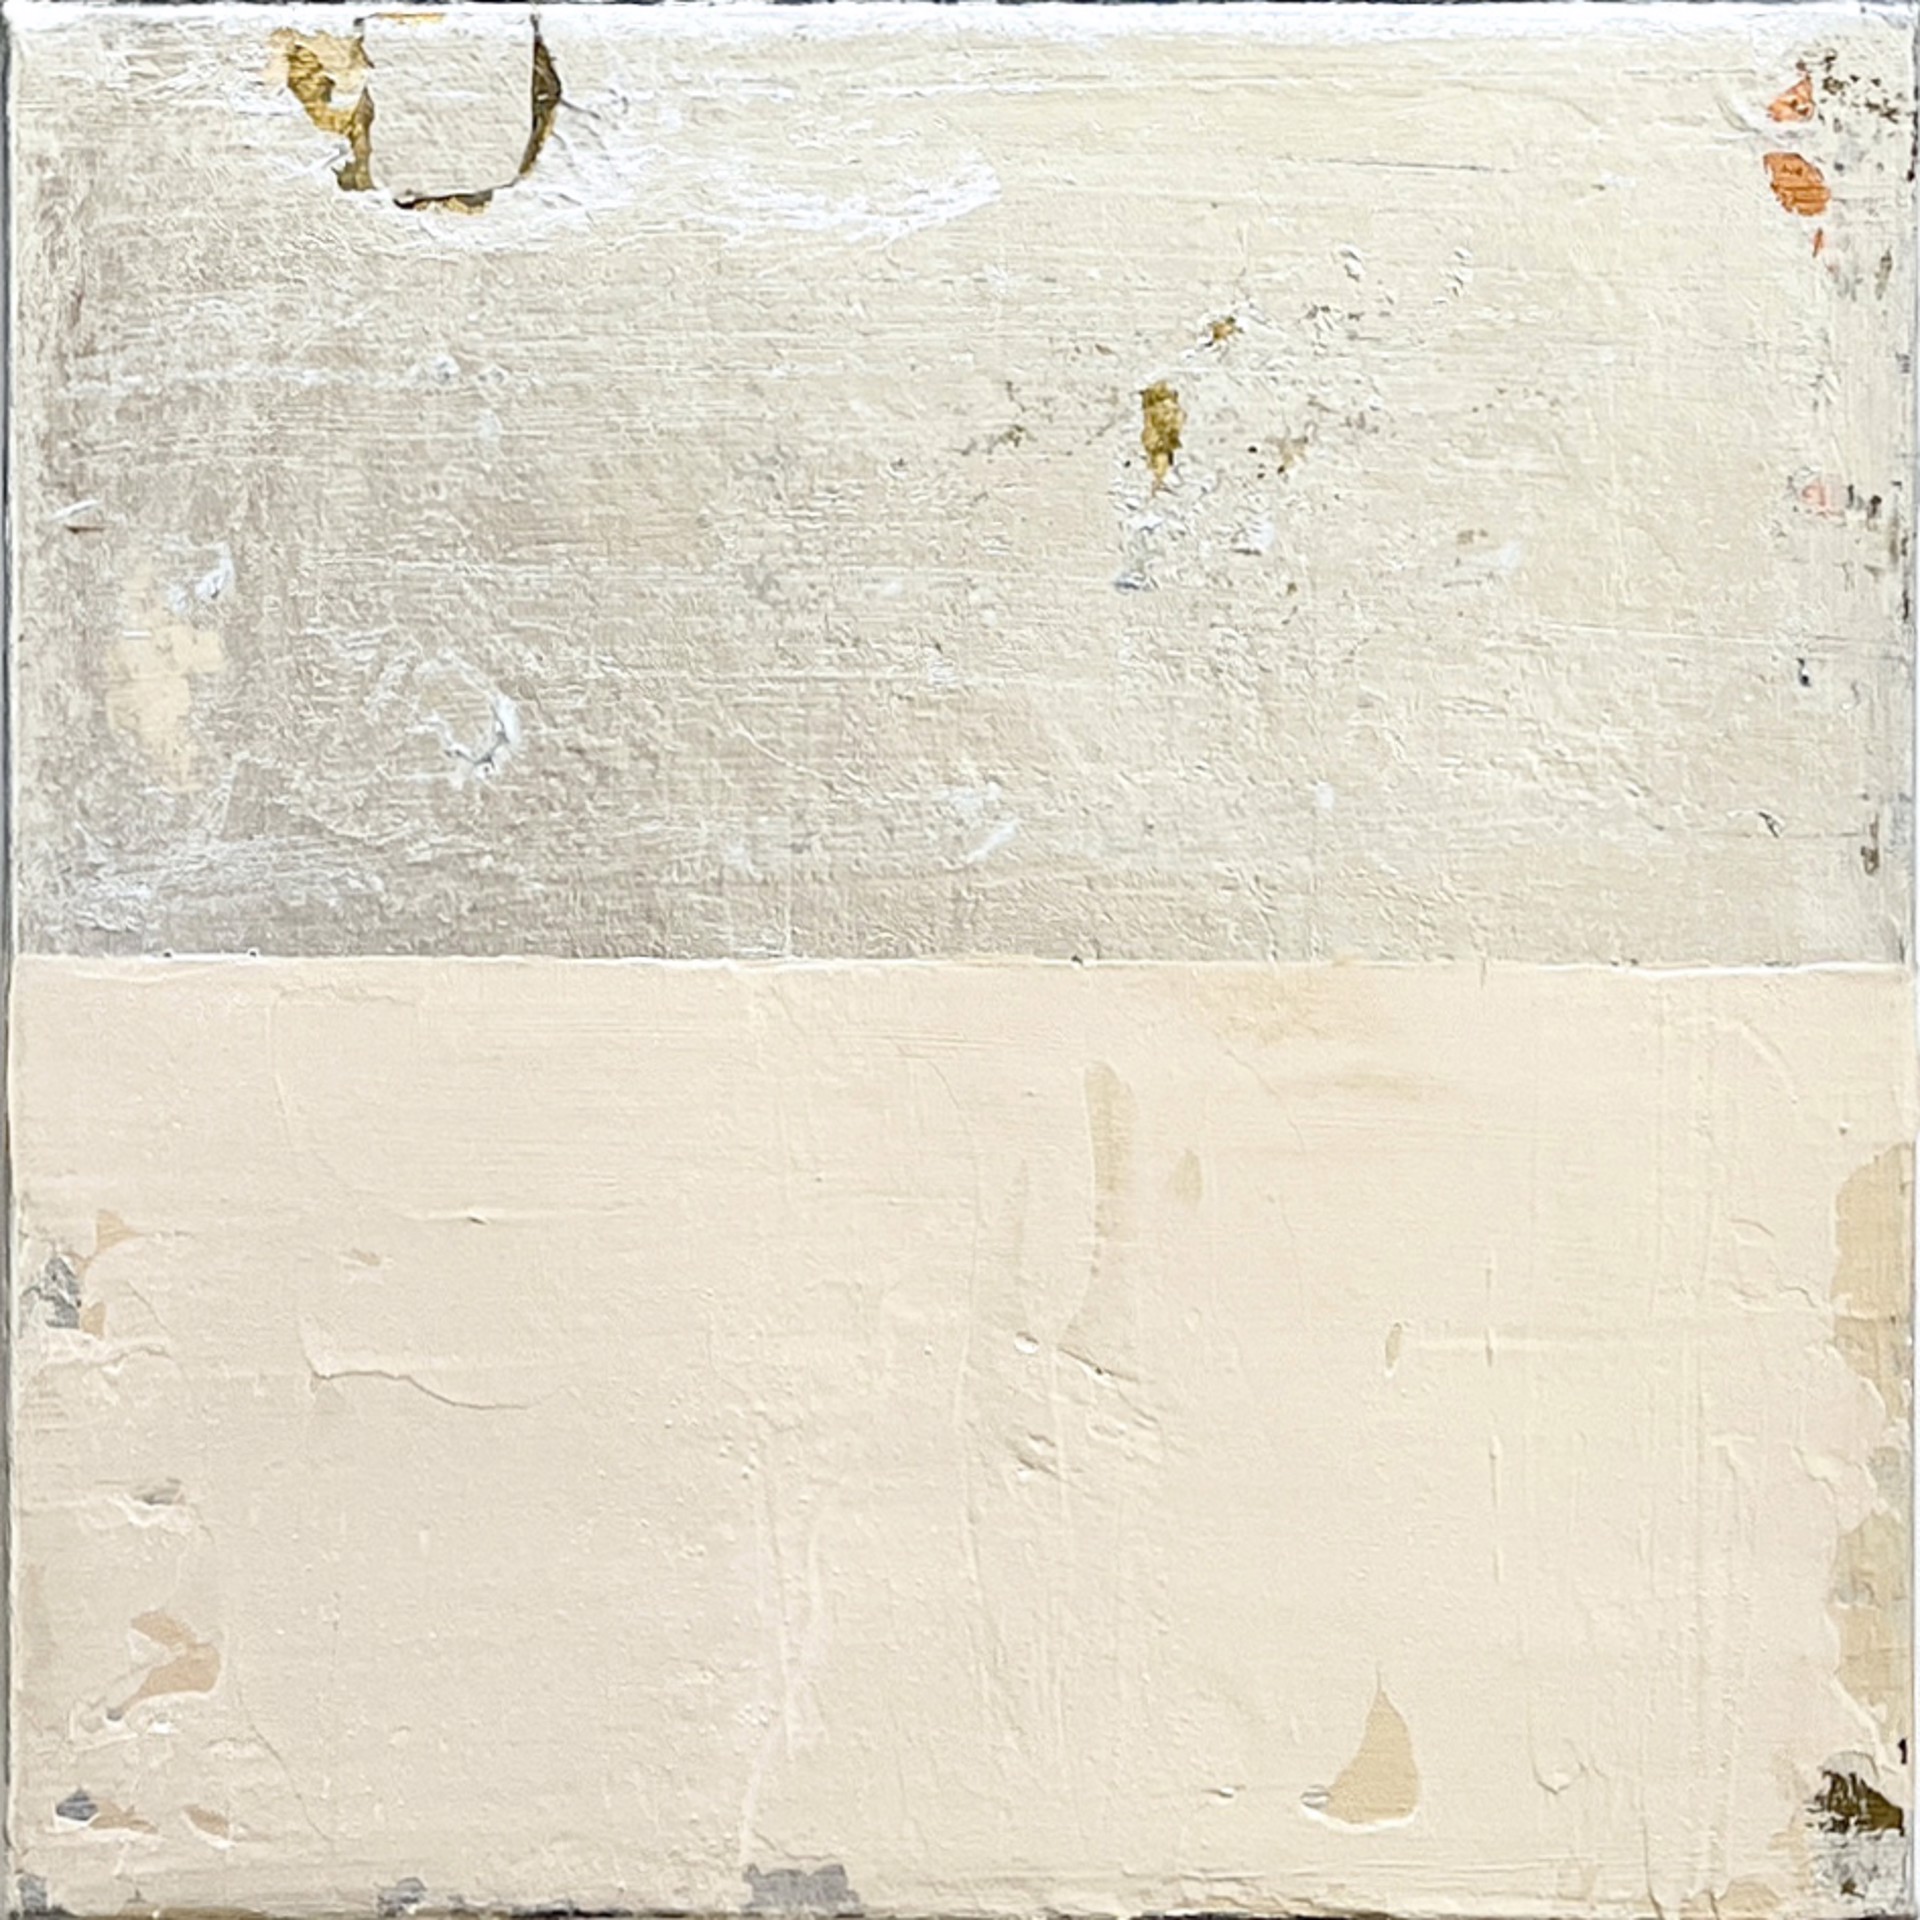 Silver and Silver (SS053) is 1 of 4 silver leaf mixed media panels from Japanese painter and artist Takefumi Hori.